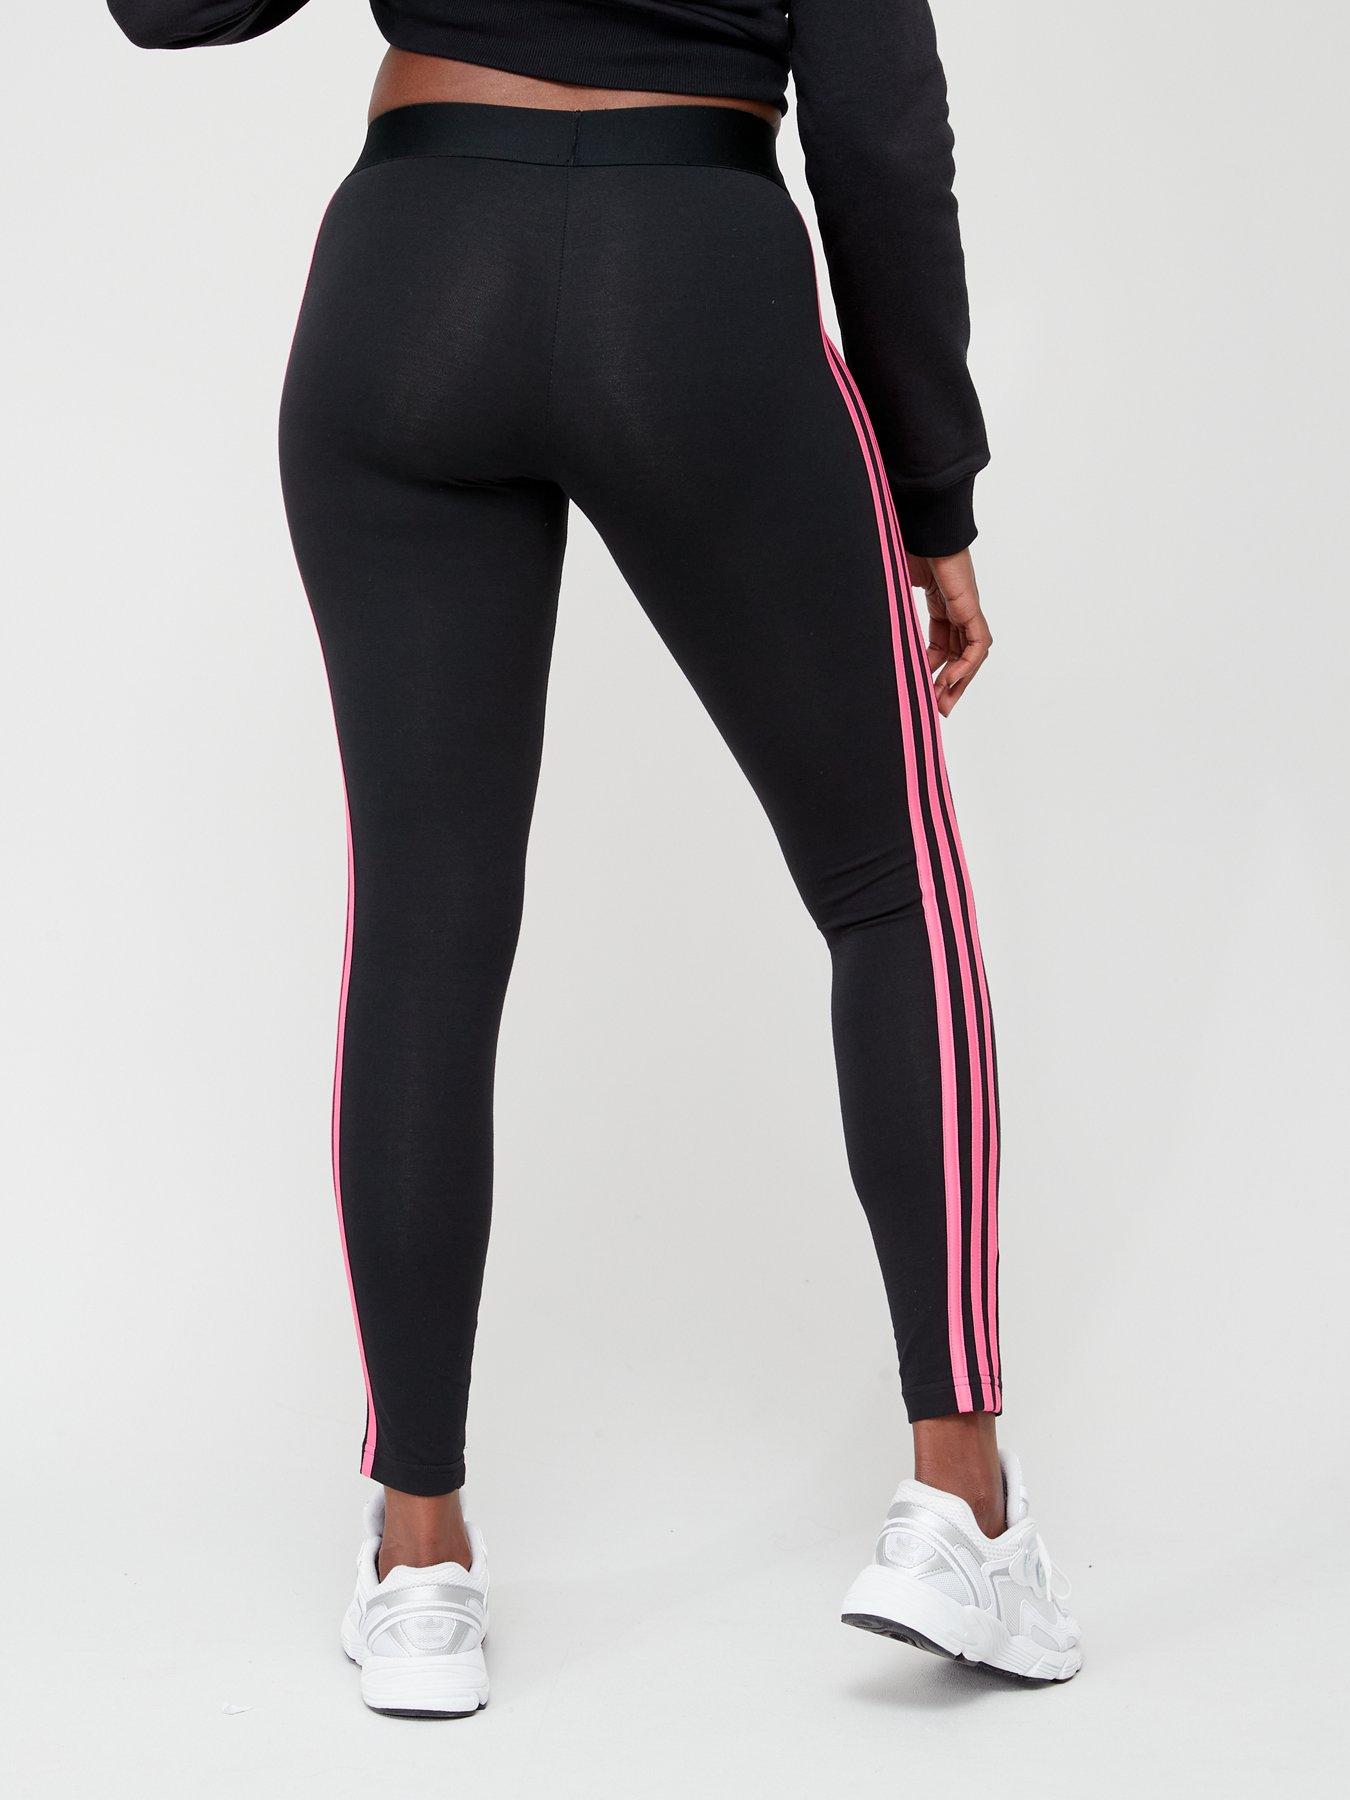 Buy adidas Red 3-Stripes Leggings from Next Ireland